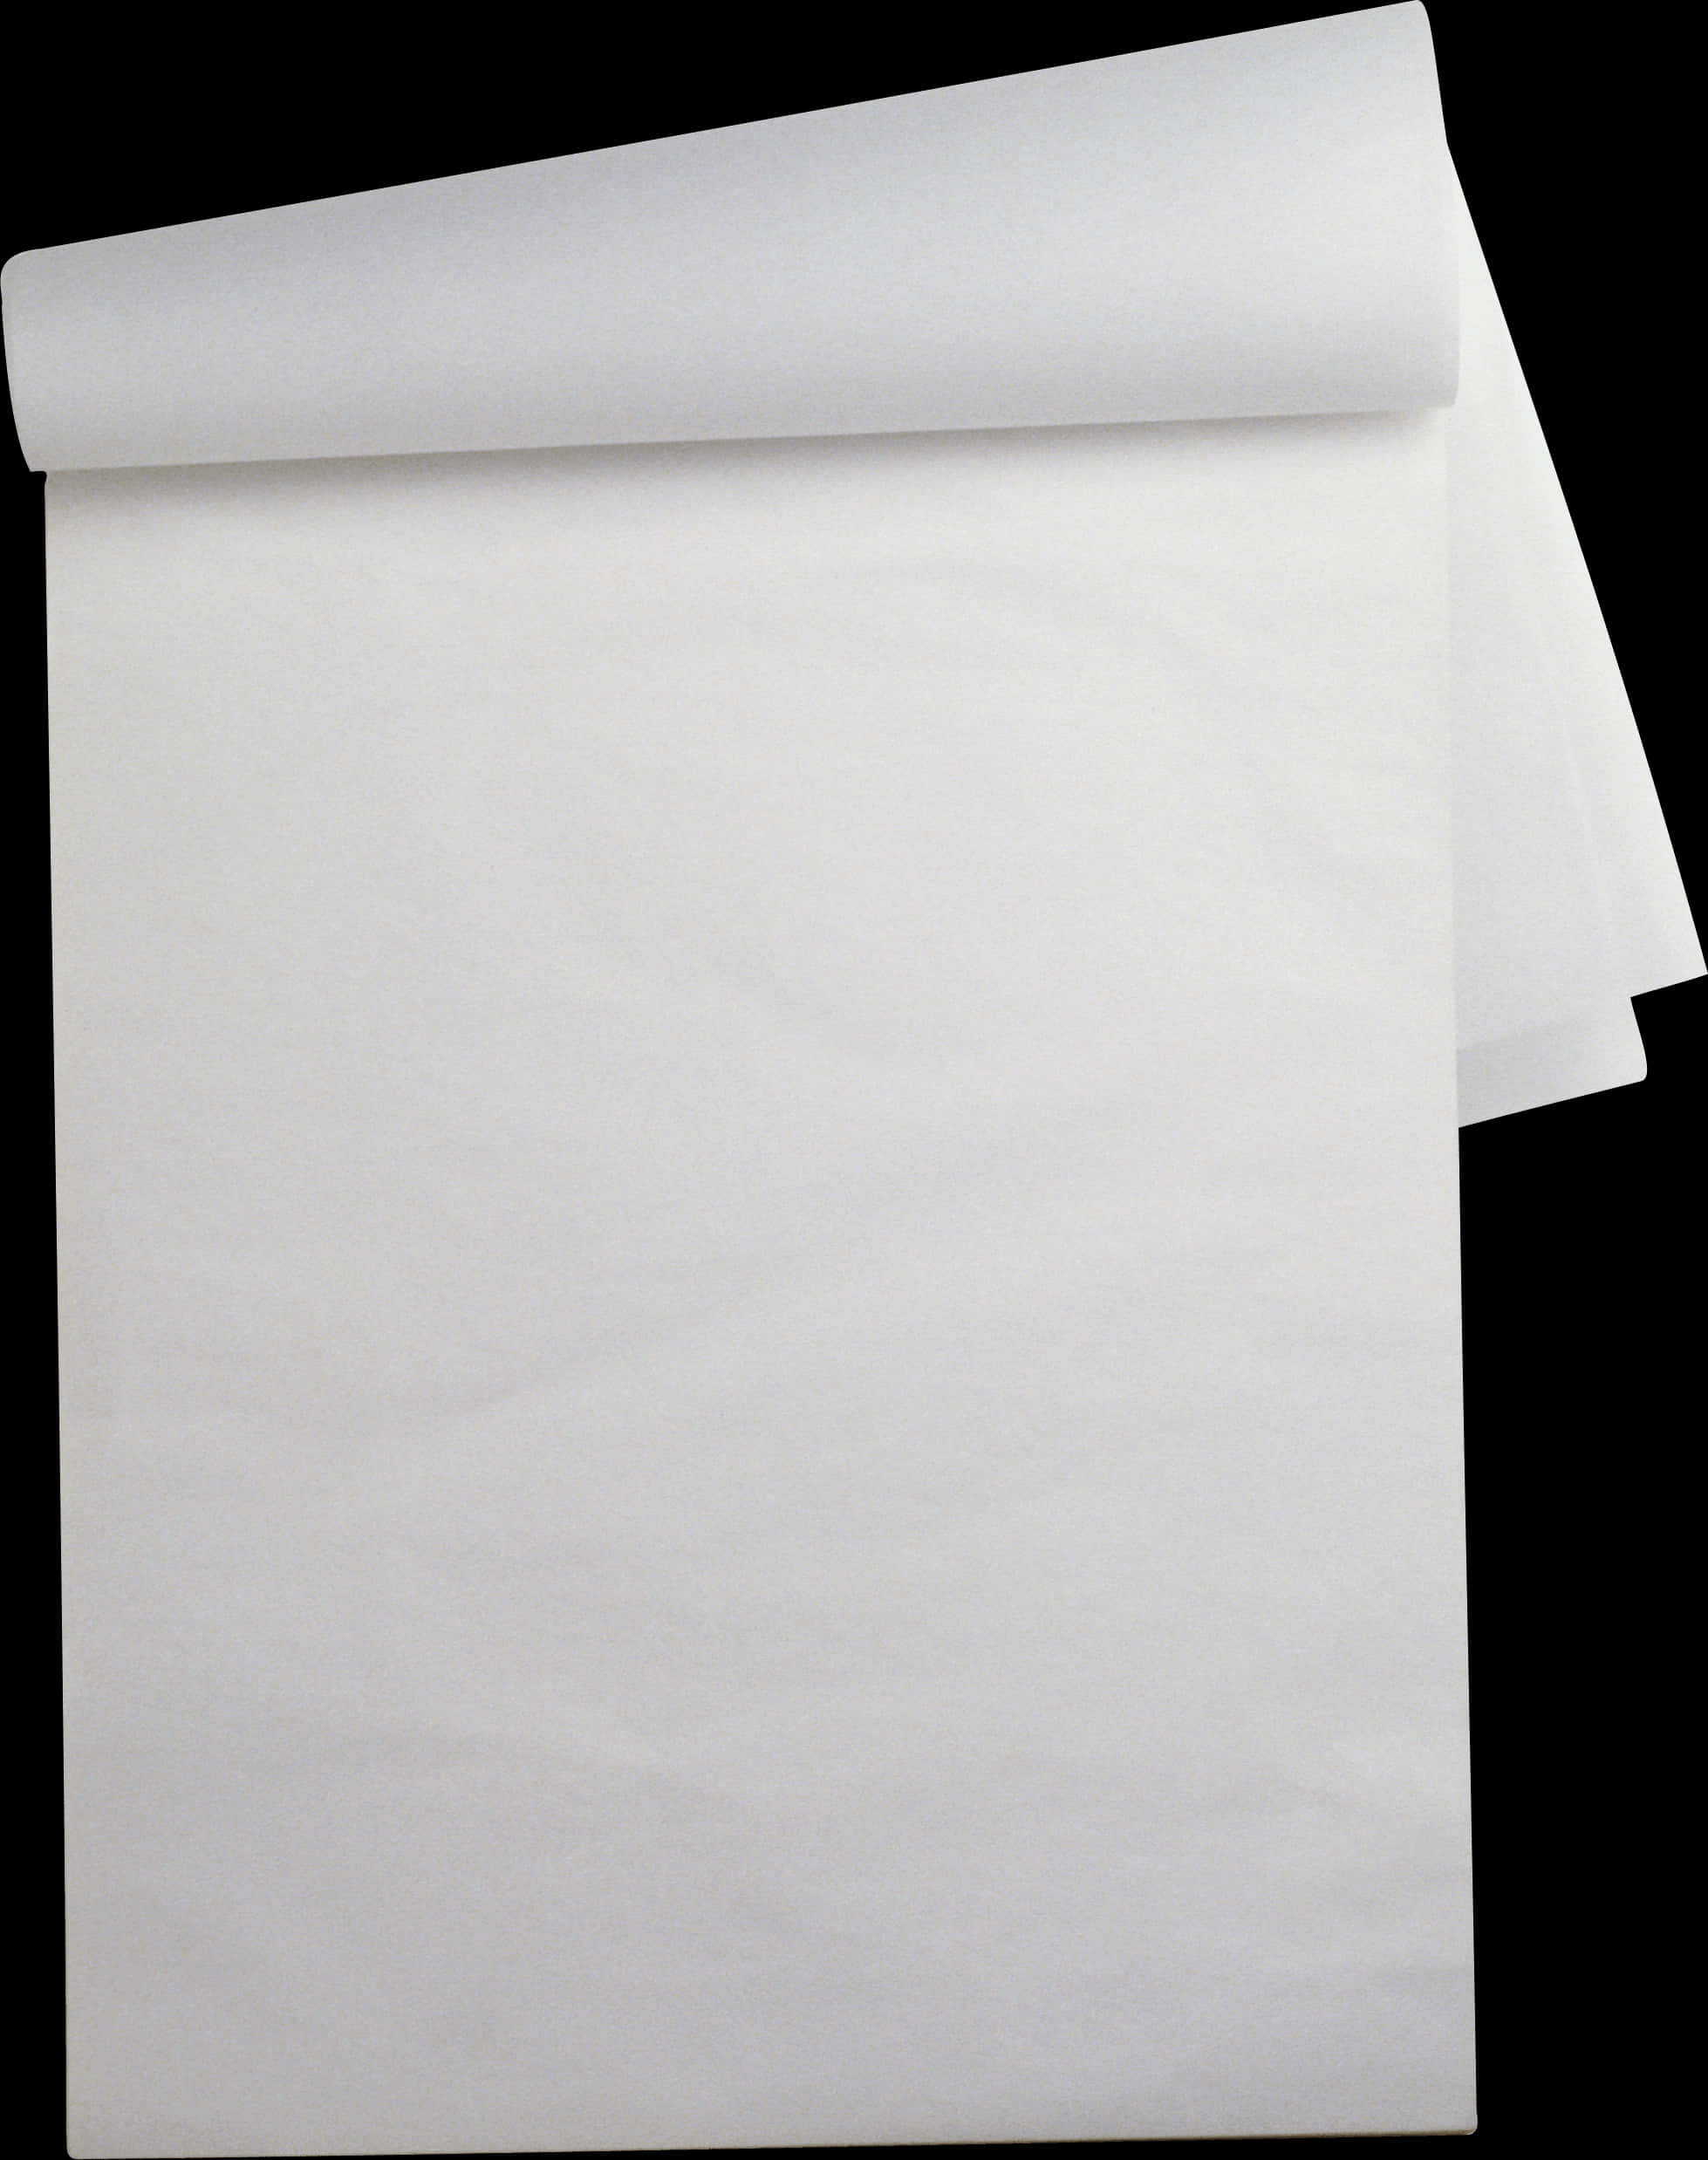 Blank Rolled Paper Sheet PNG